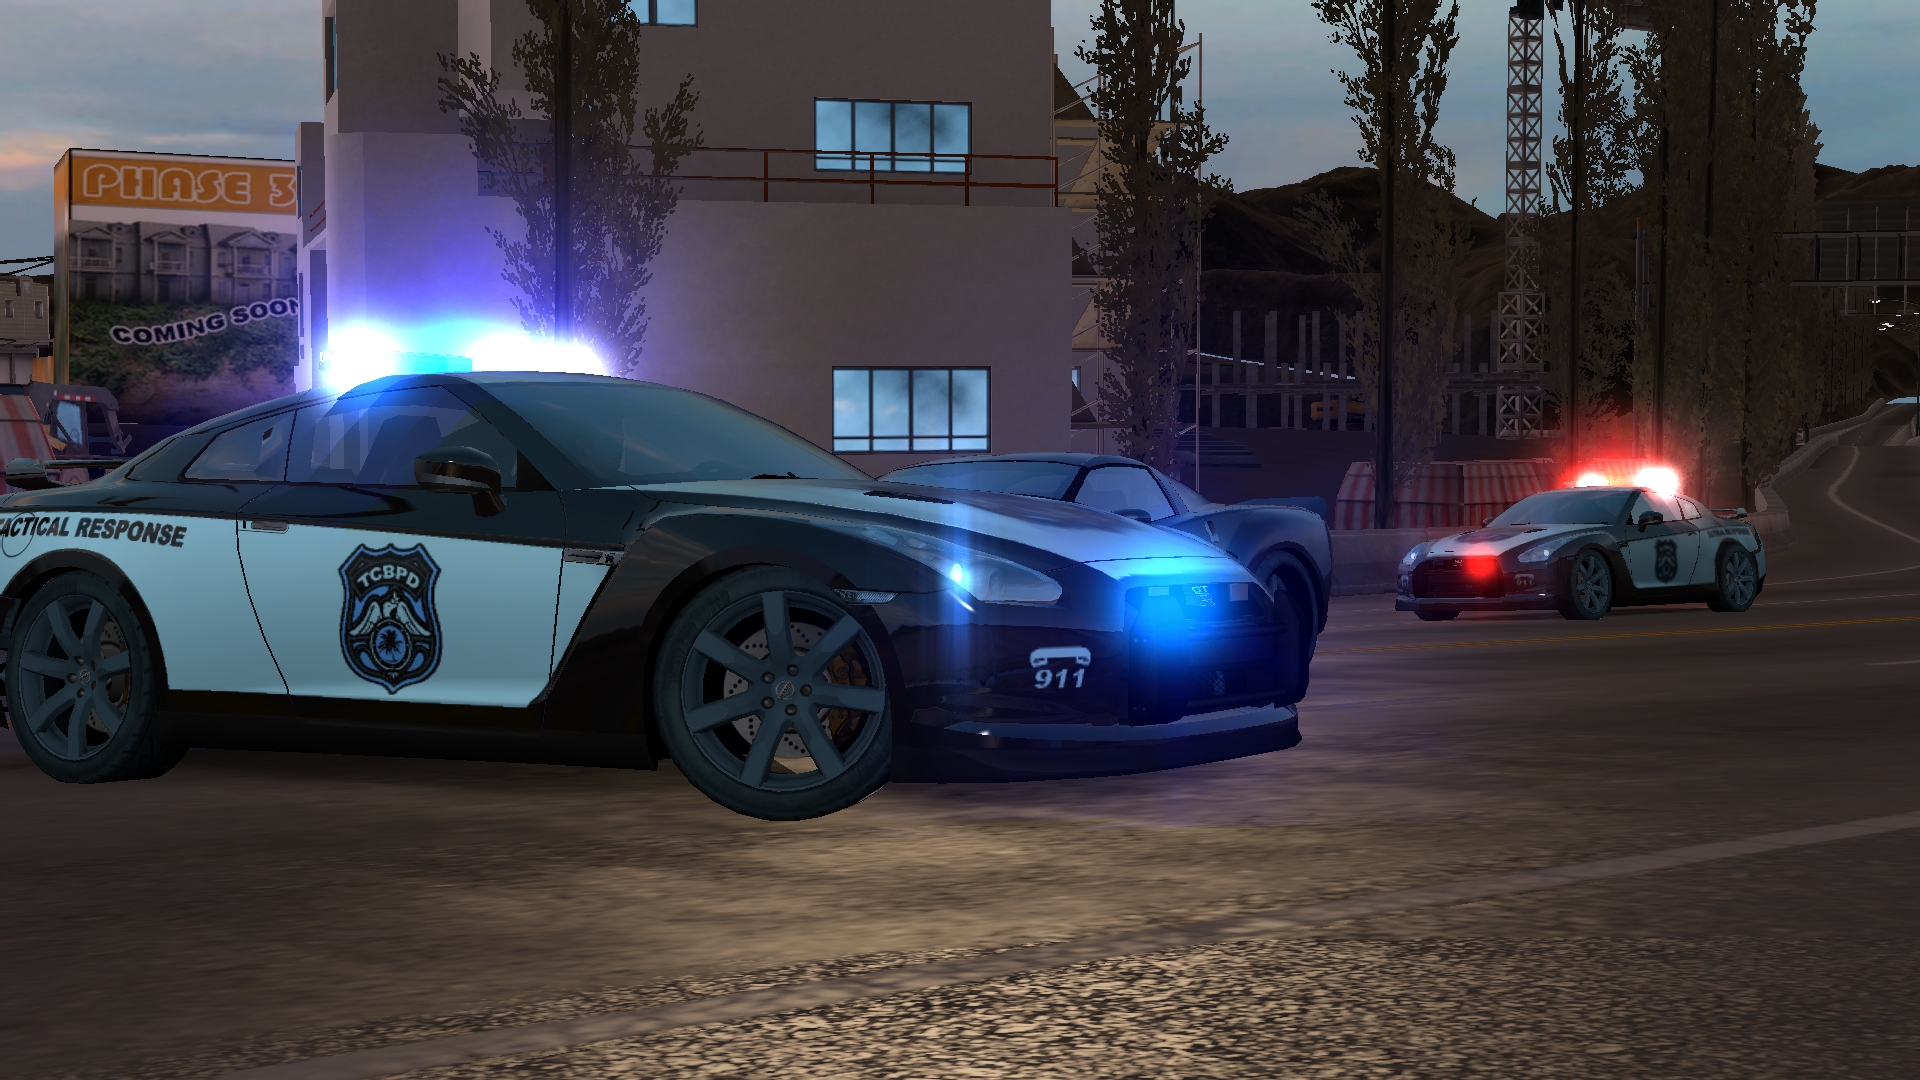 Need For Speed Undercover black and white police Nissan